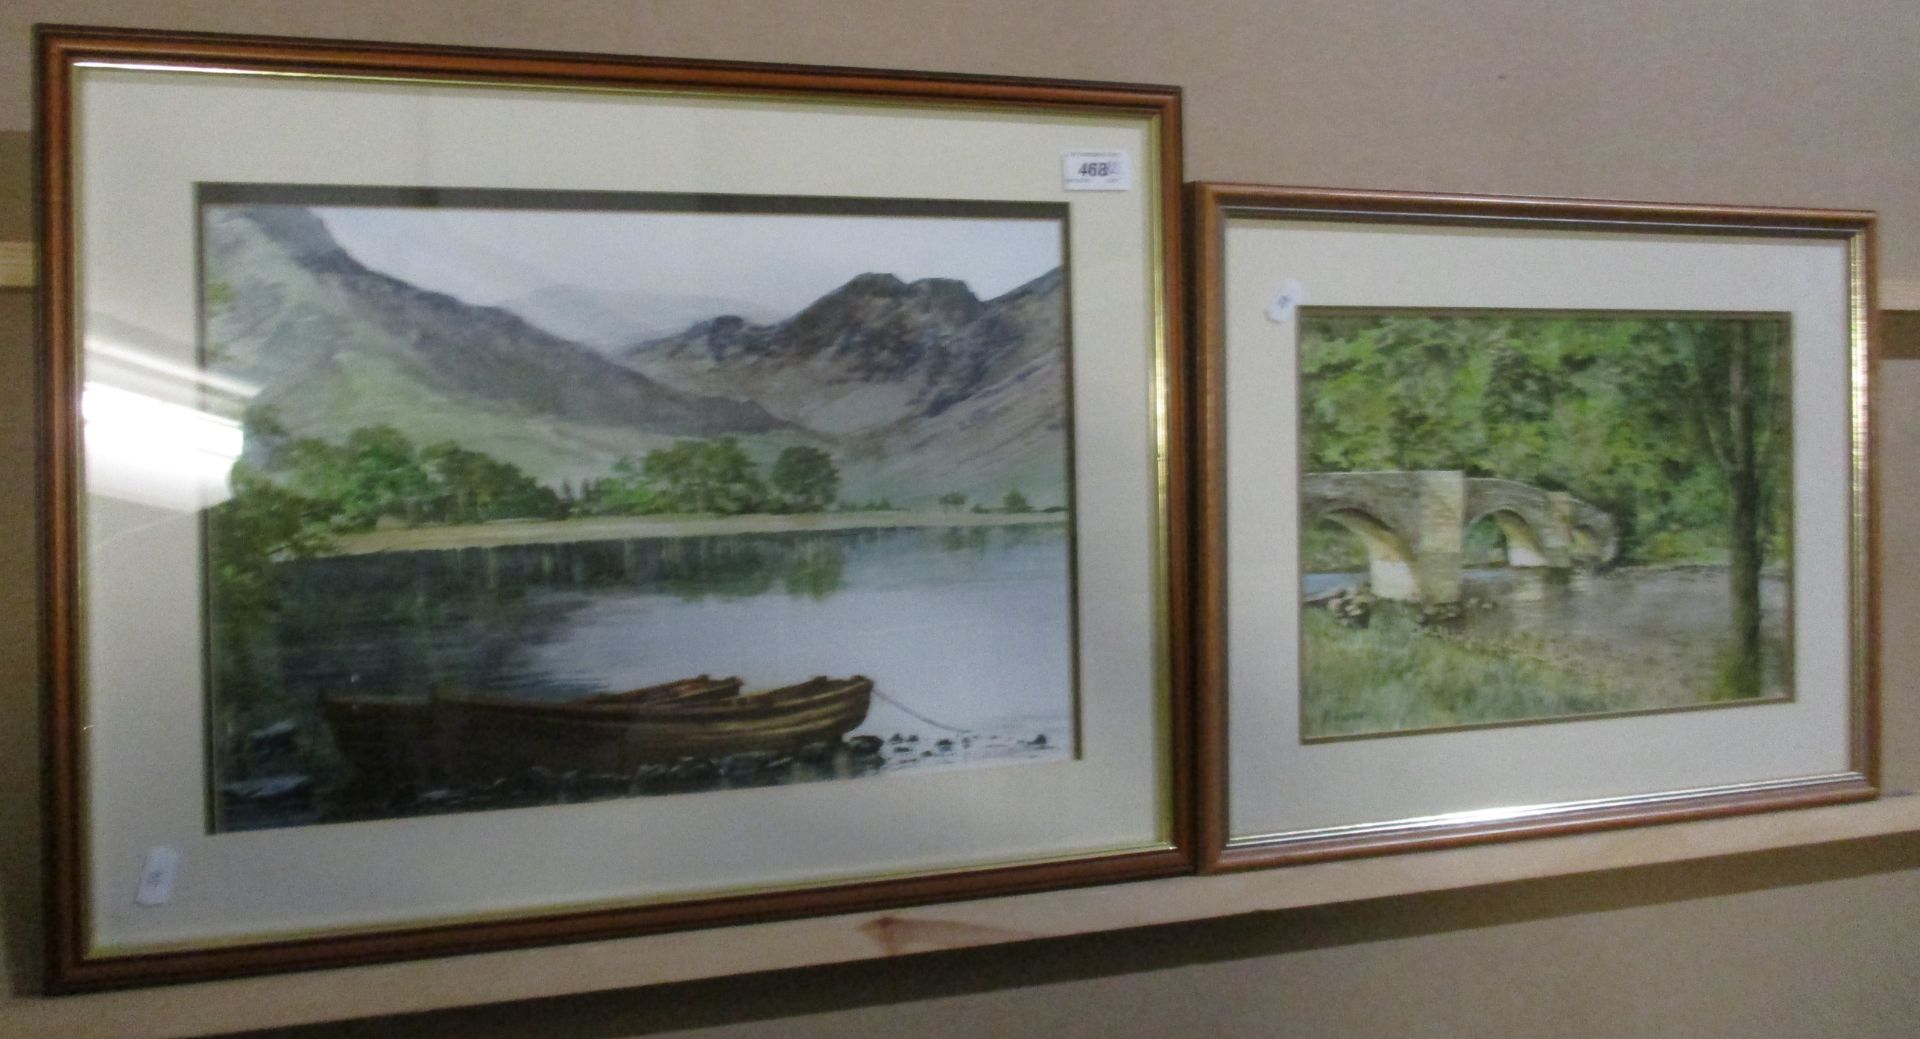 R Walker framed watercolour 'Boats on Buttermere' 30 x 42cm signed and another 'Barden Bridge' 26 x